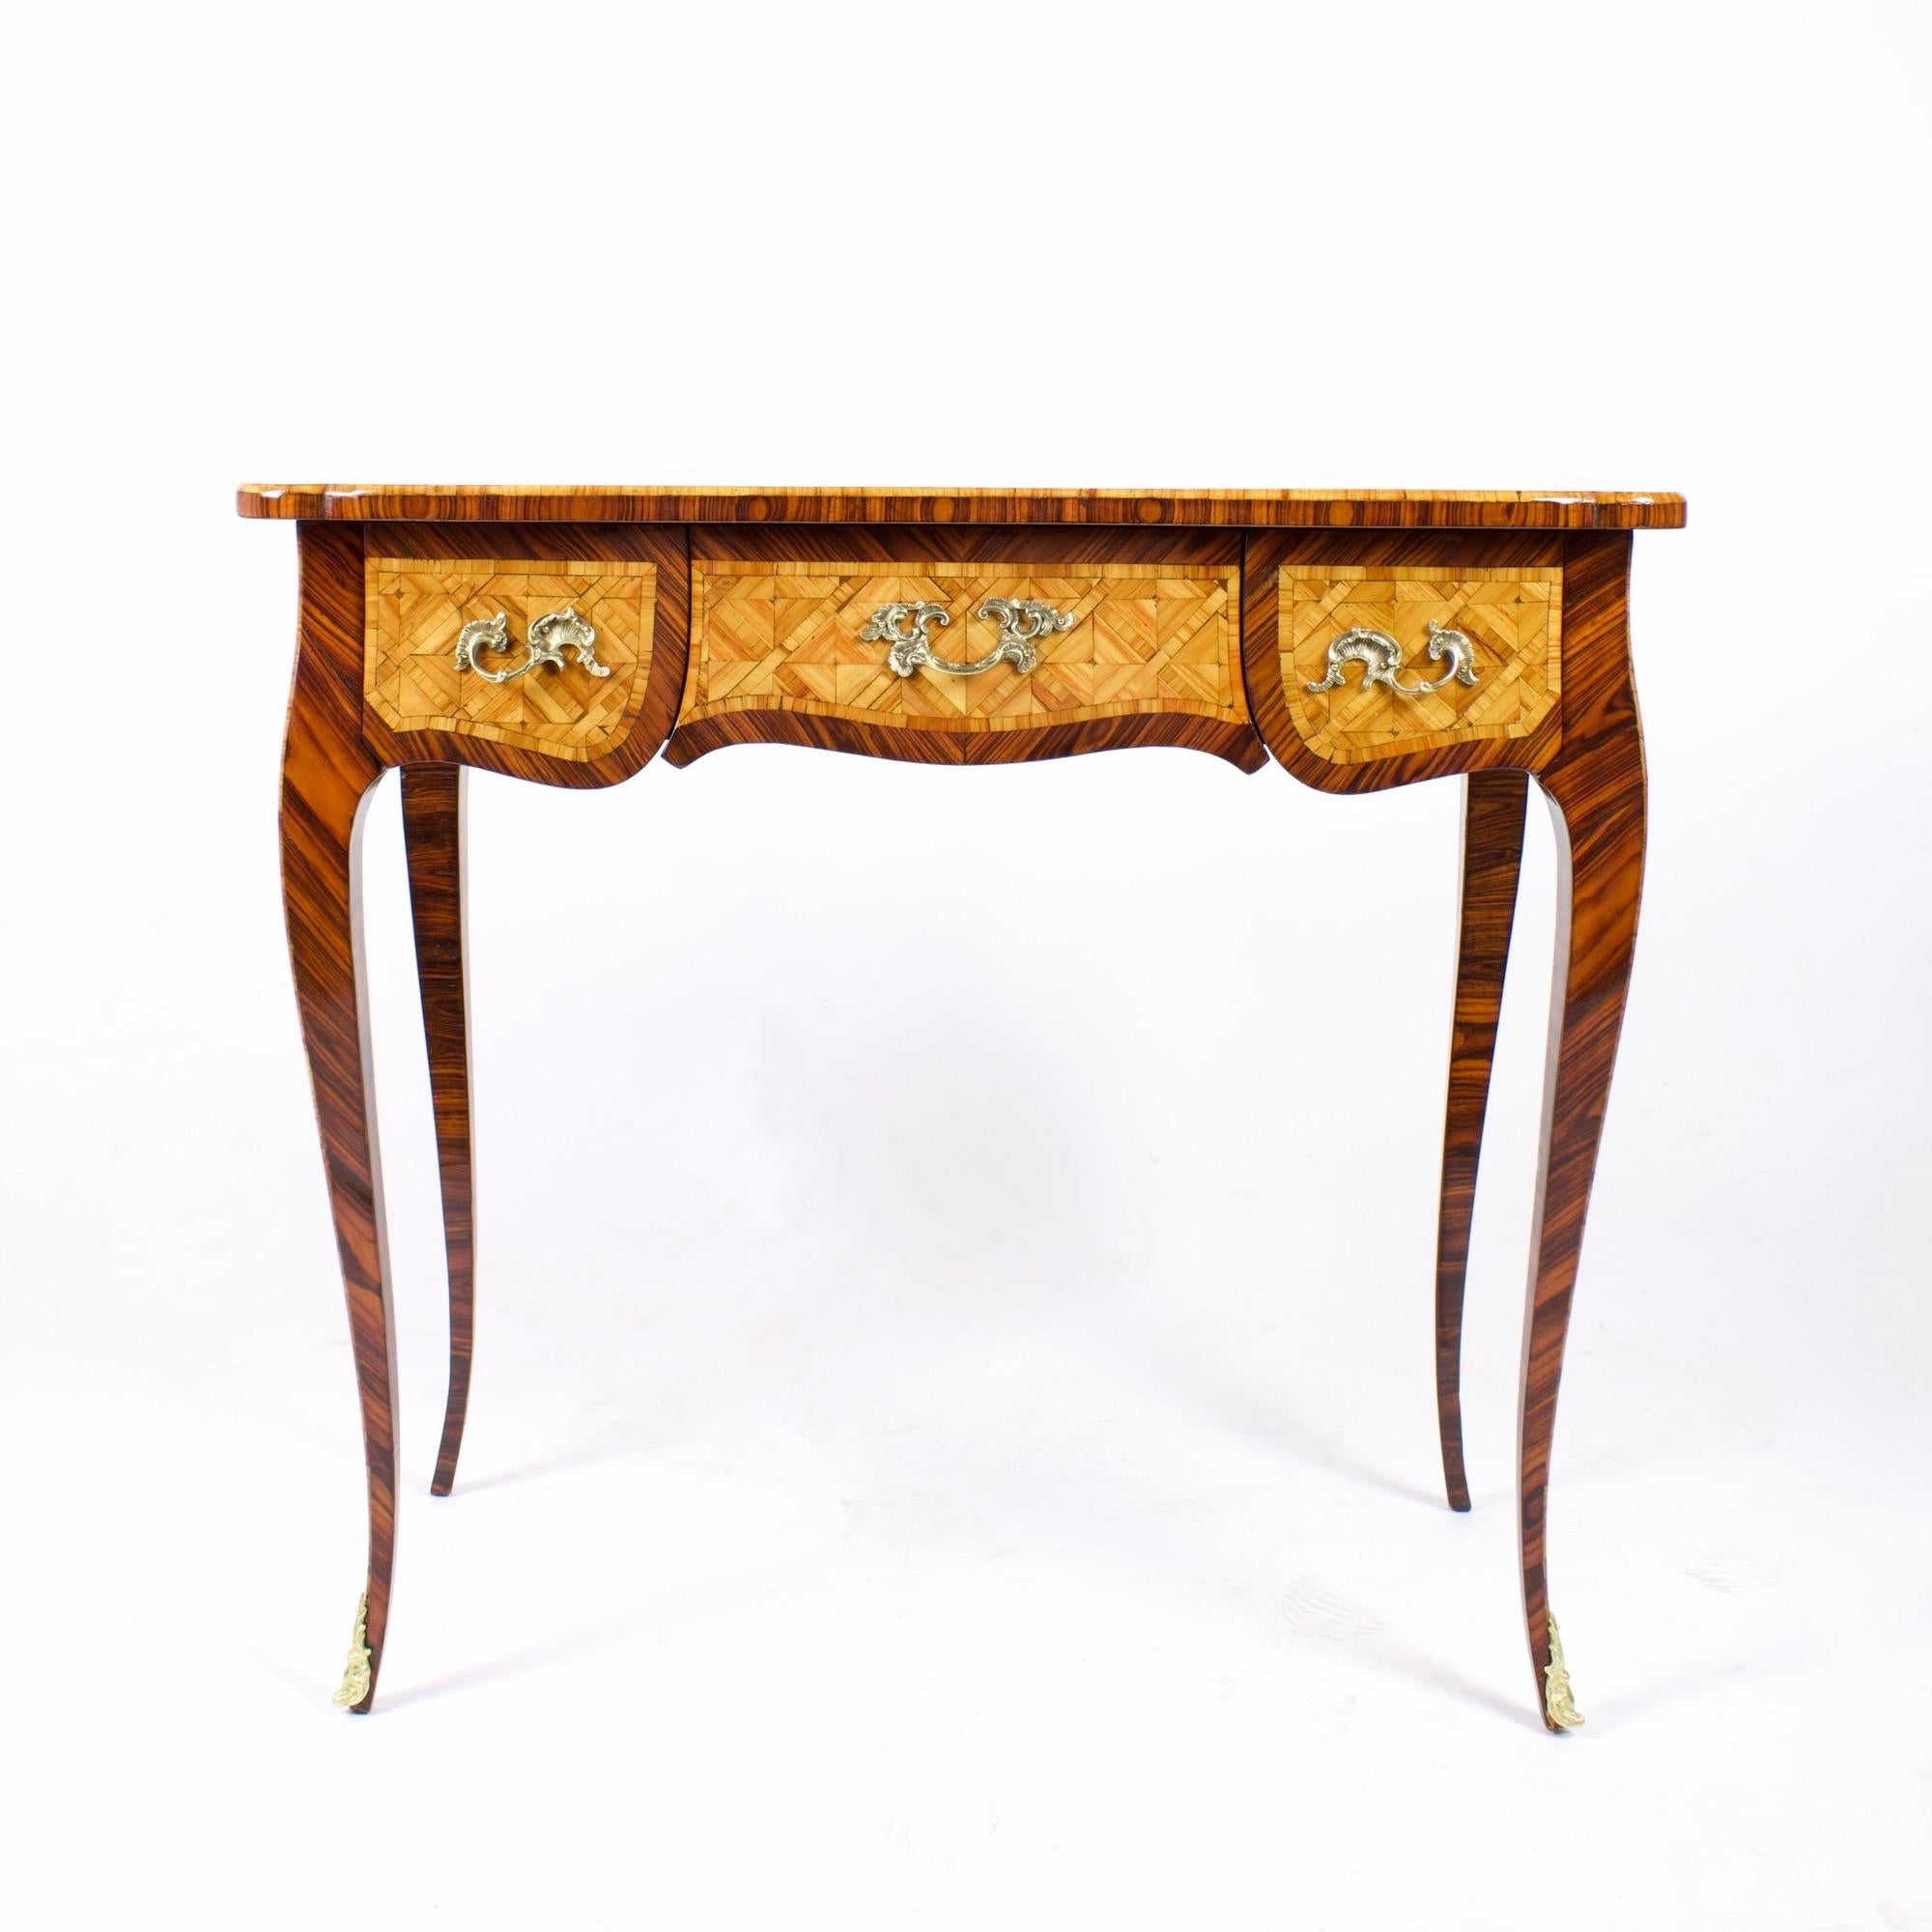 19th century French small Louis XV Style Napoleon III Trelliswork marquetry ladies' desk or bureau plat

An excellently excecuted small Louis XV style ladies' desk standing on four slender cabriole legs and holding three front drawers that follow